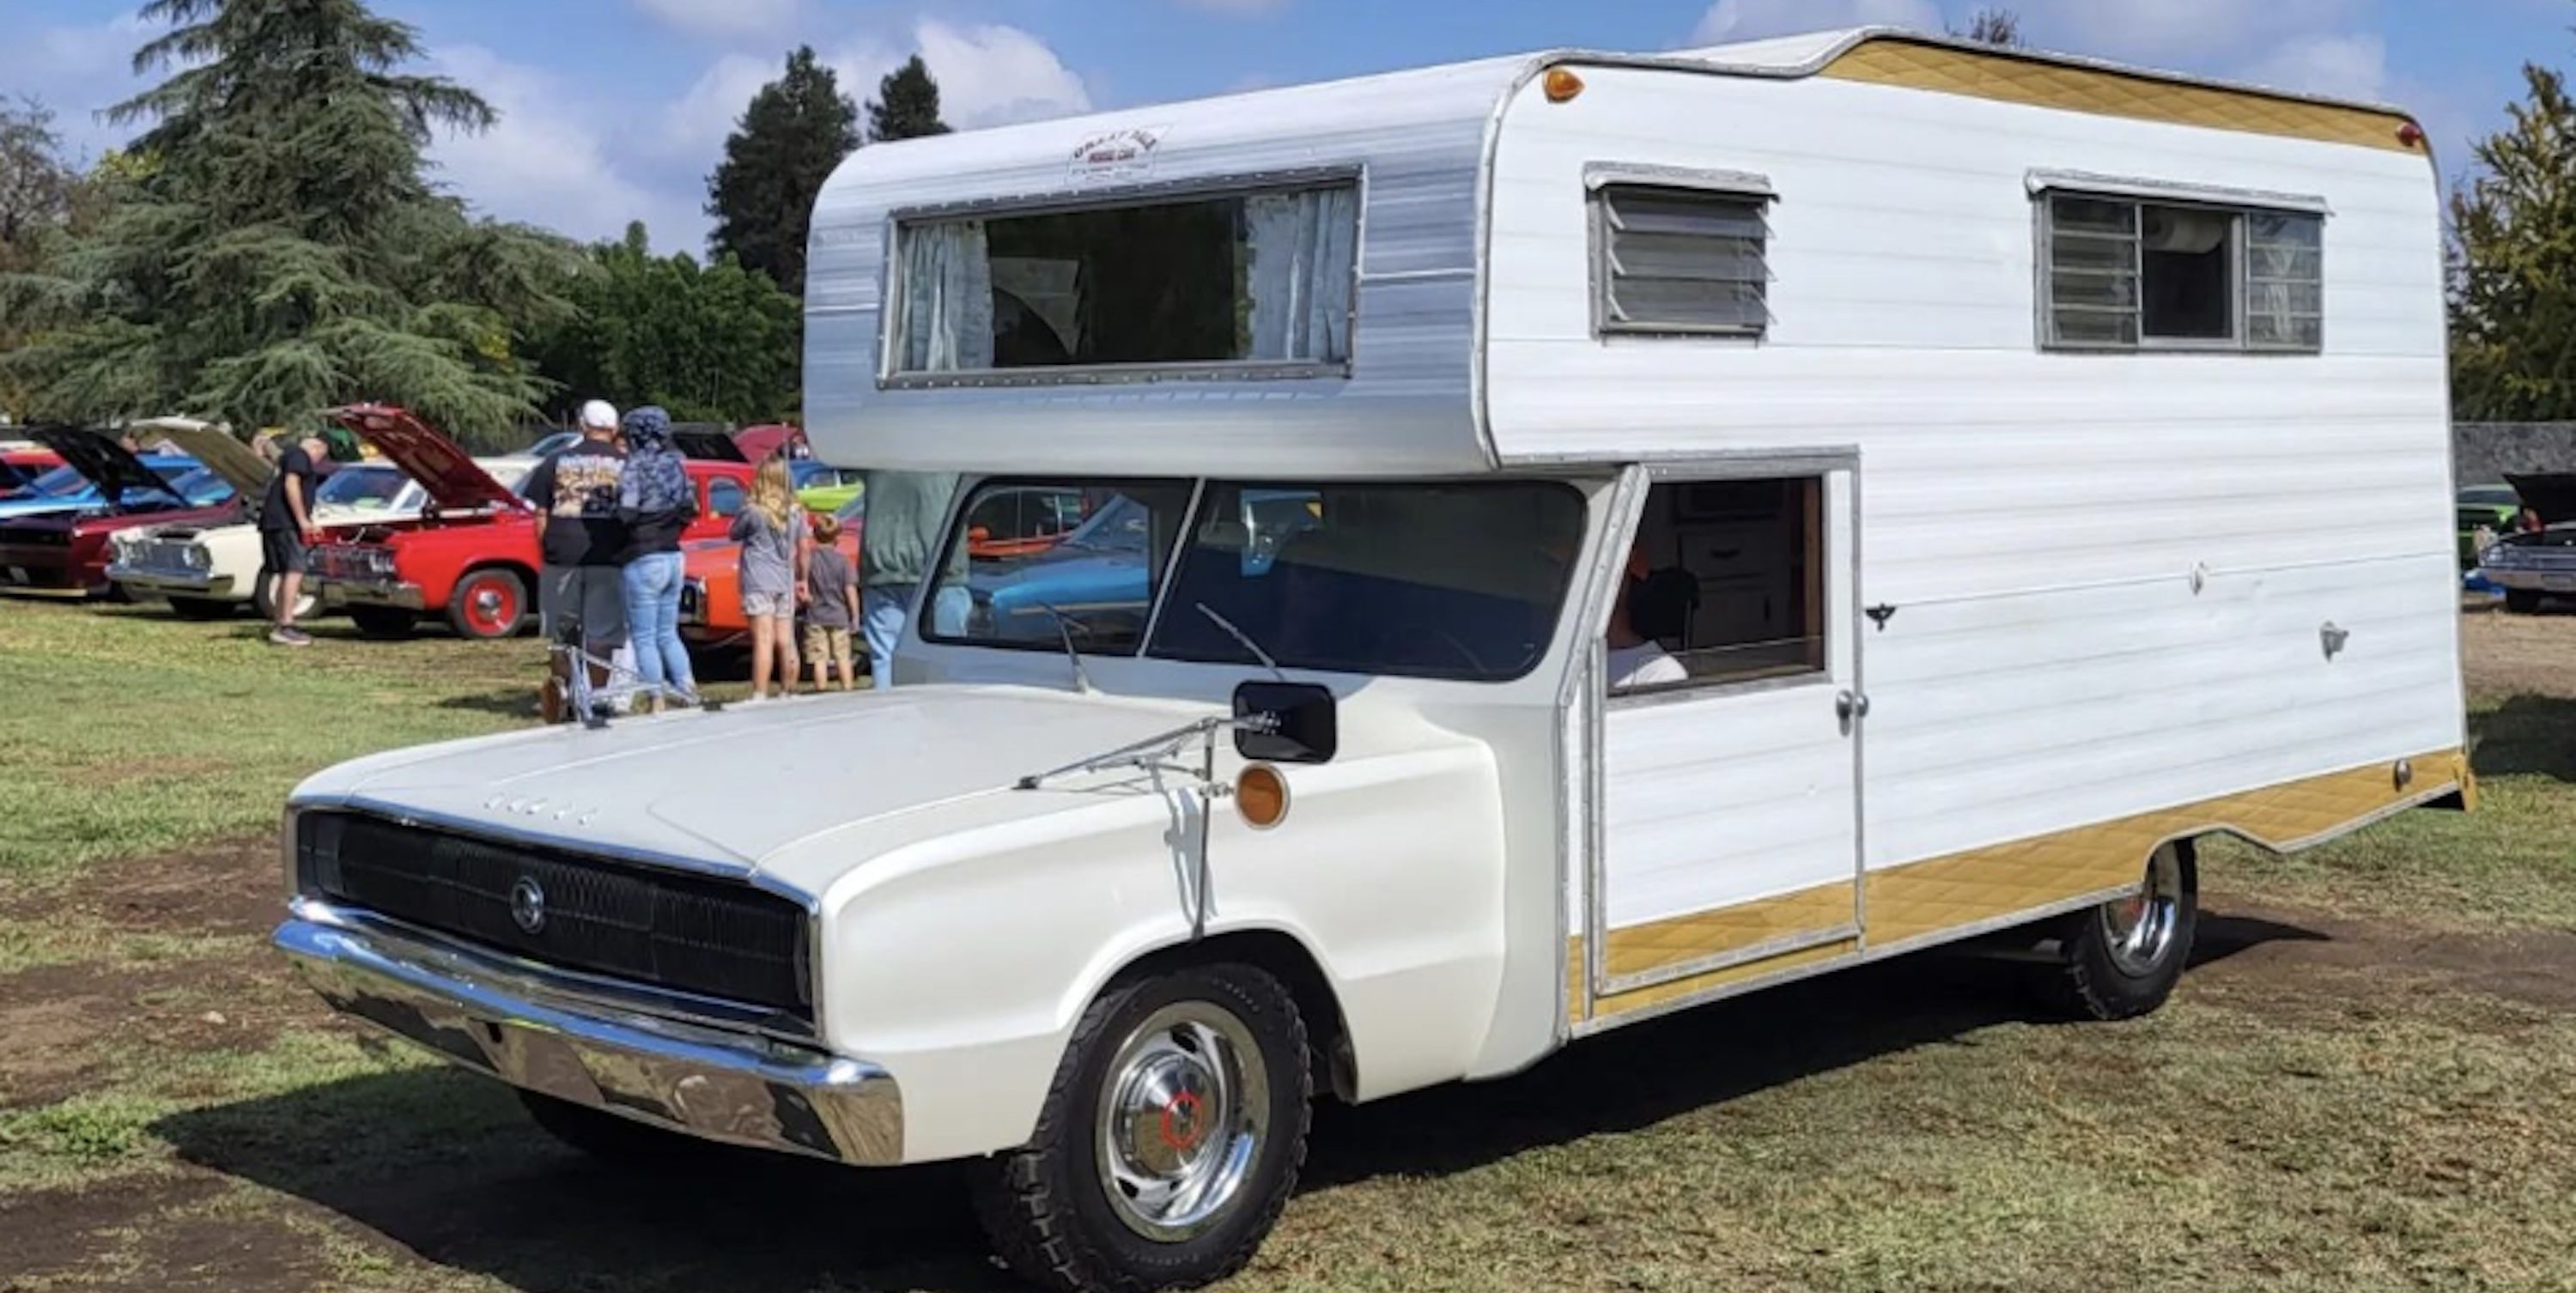 I Bet You've Never Seen a 1966 Dodge Charger RV